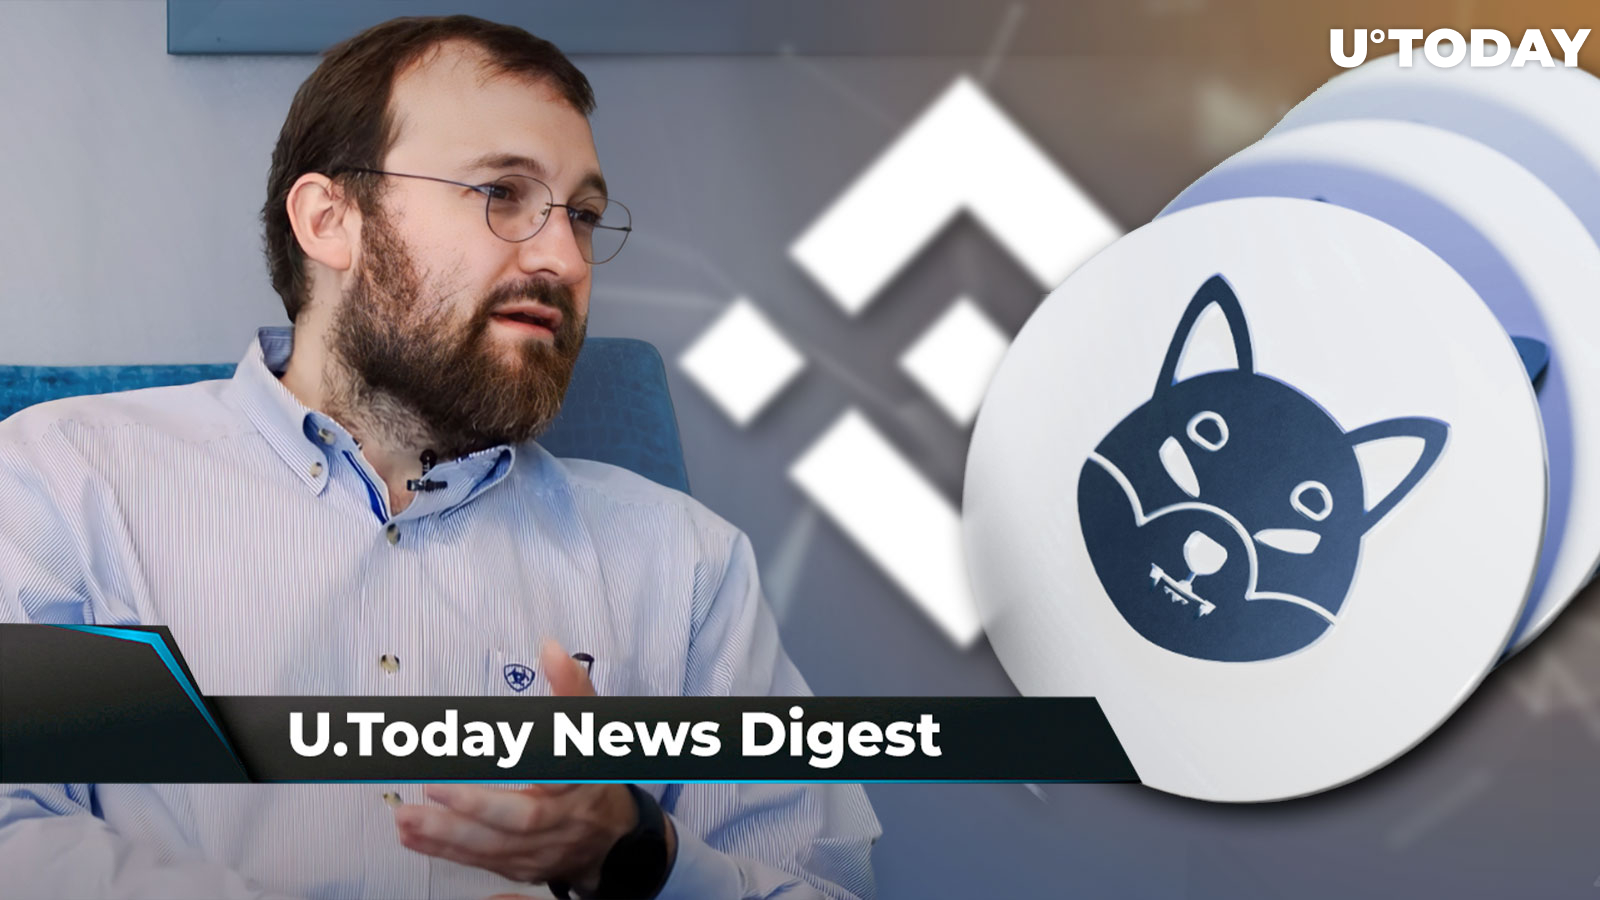 Charles Hoskinson Says He Might End up With Egg on His Face, Ripple CTO Slams “Shark Tank” Star, 750 Billion SHIB Sent to Binance: Crypto News Digest by U.Today